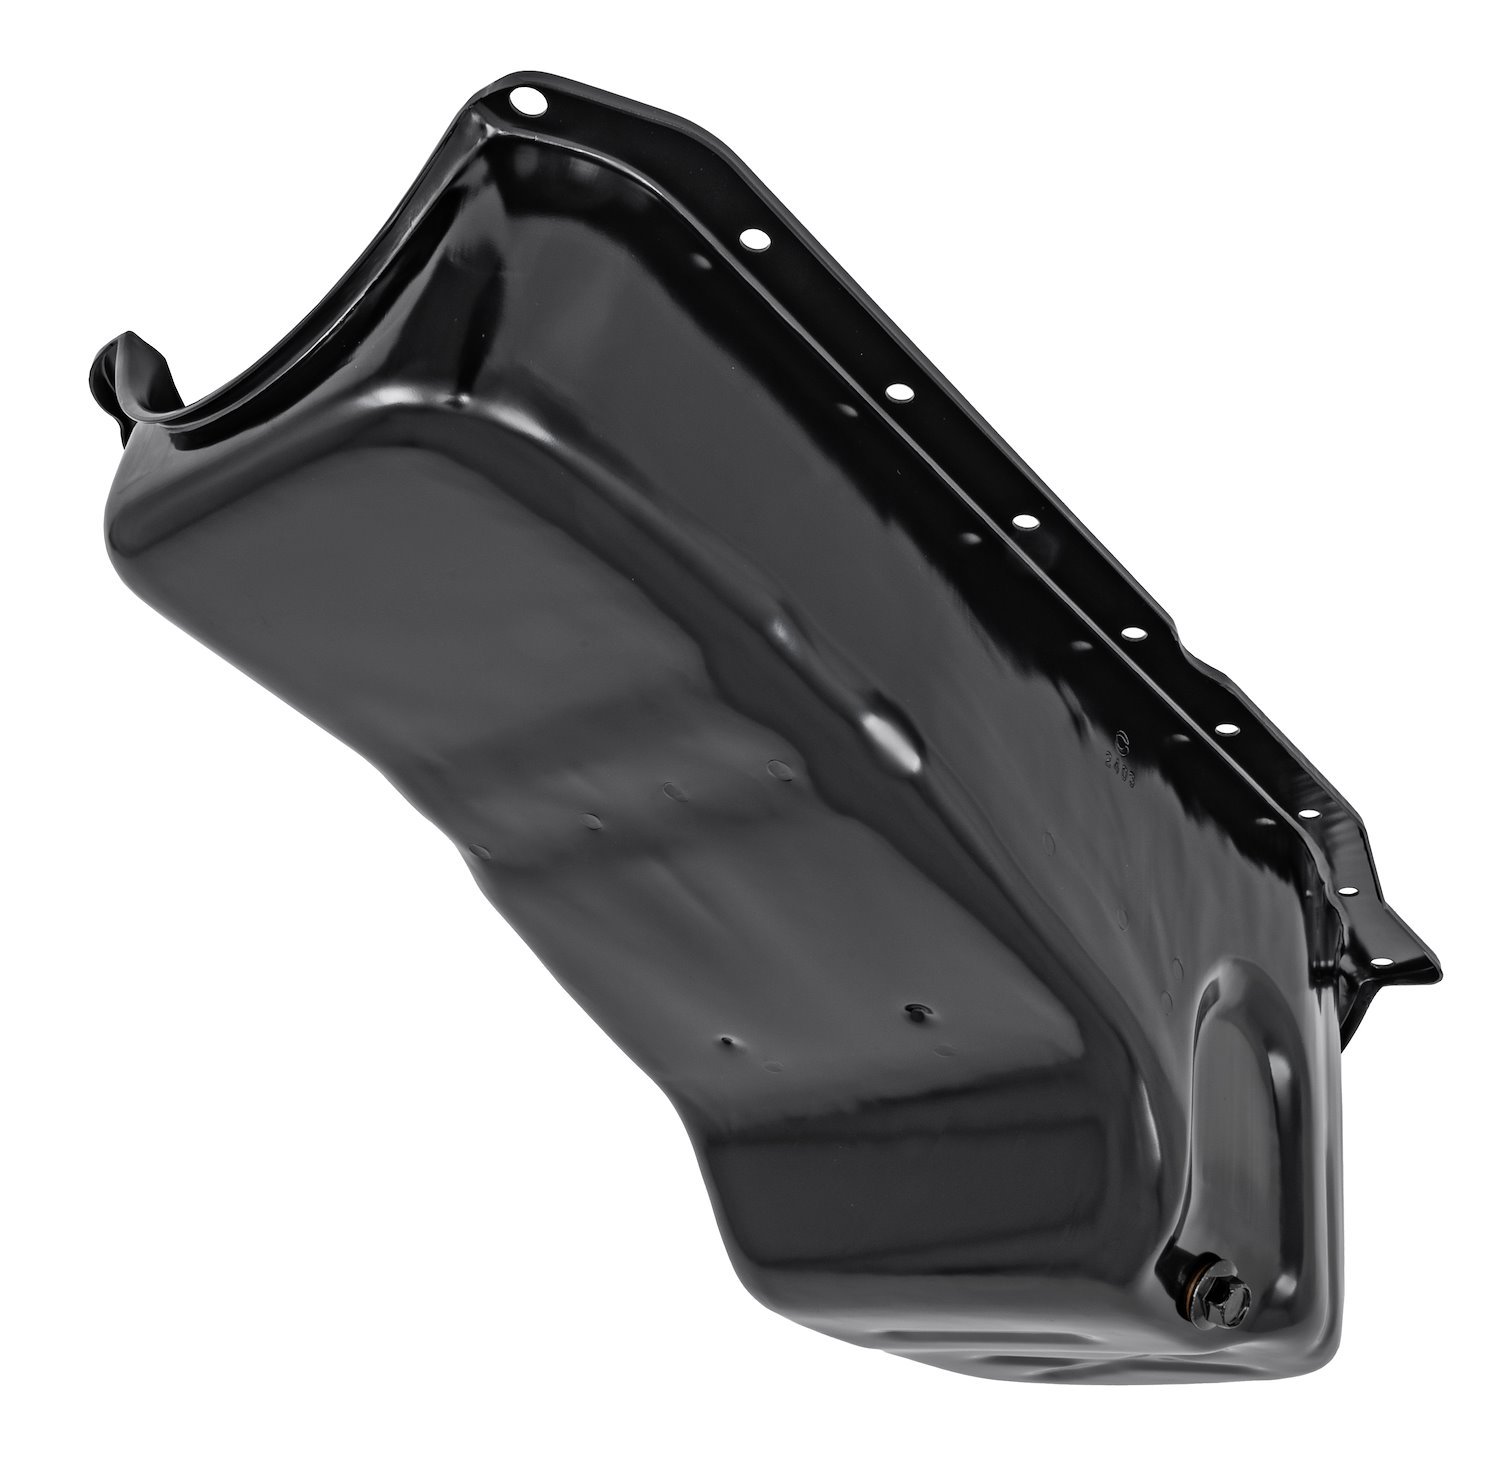 Stock-Style Replacement Oil Pan Fits Select 1979-2007 Buick, Cadillac, Chevy, GMC, Olds, Pontiac Models w/305, 350 Chevy V8 Eng.